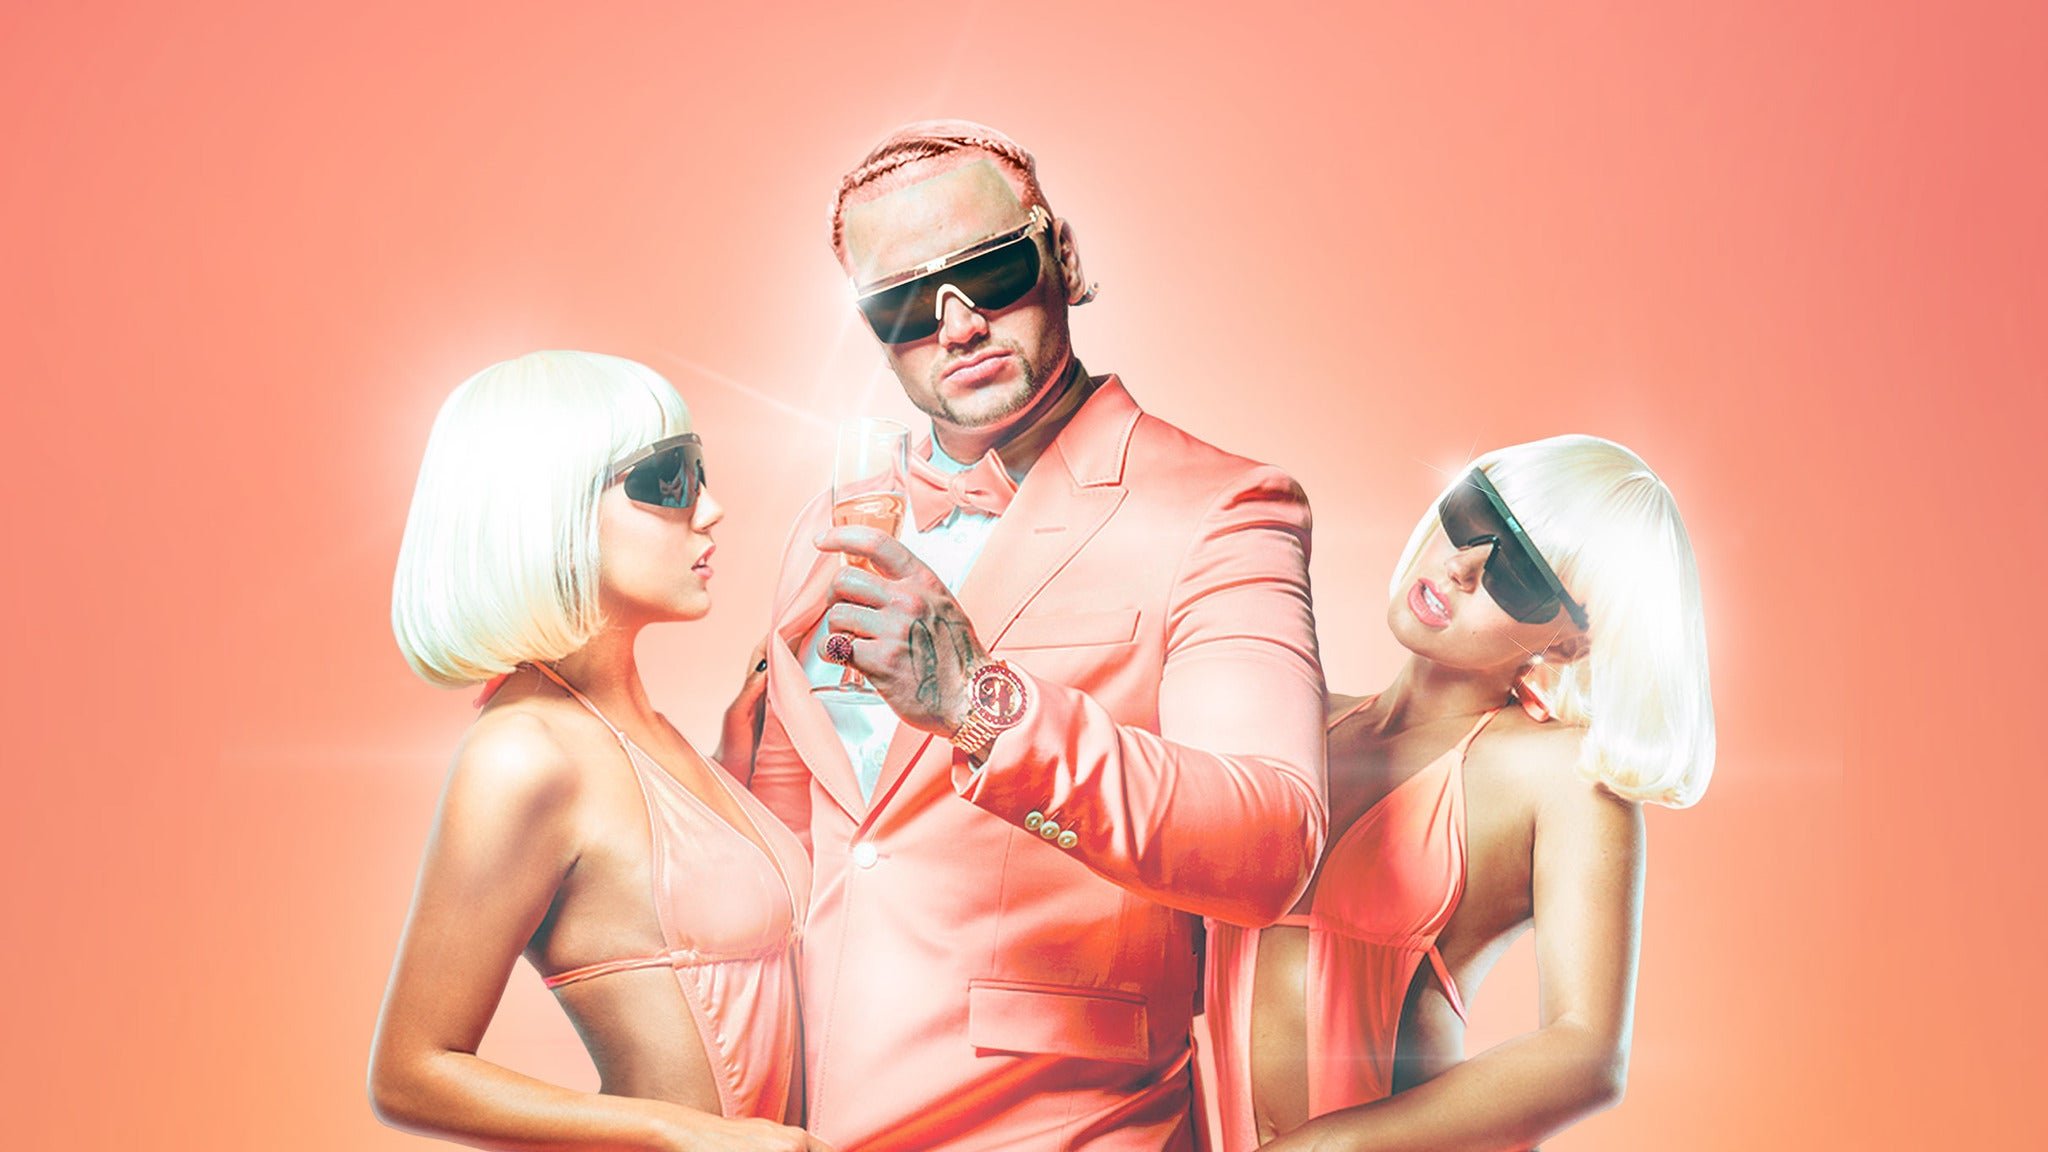 Riff Raff: The Peach Panther Tour. Theatre of Living Arts